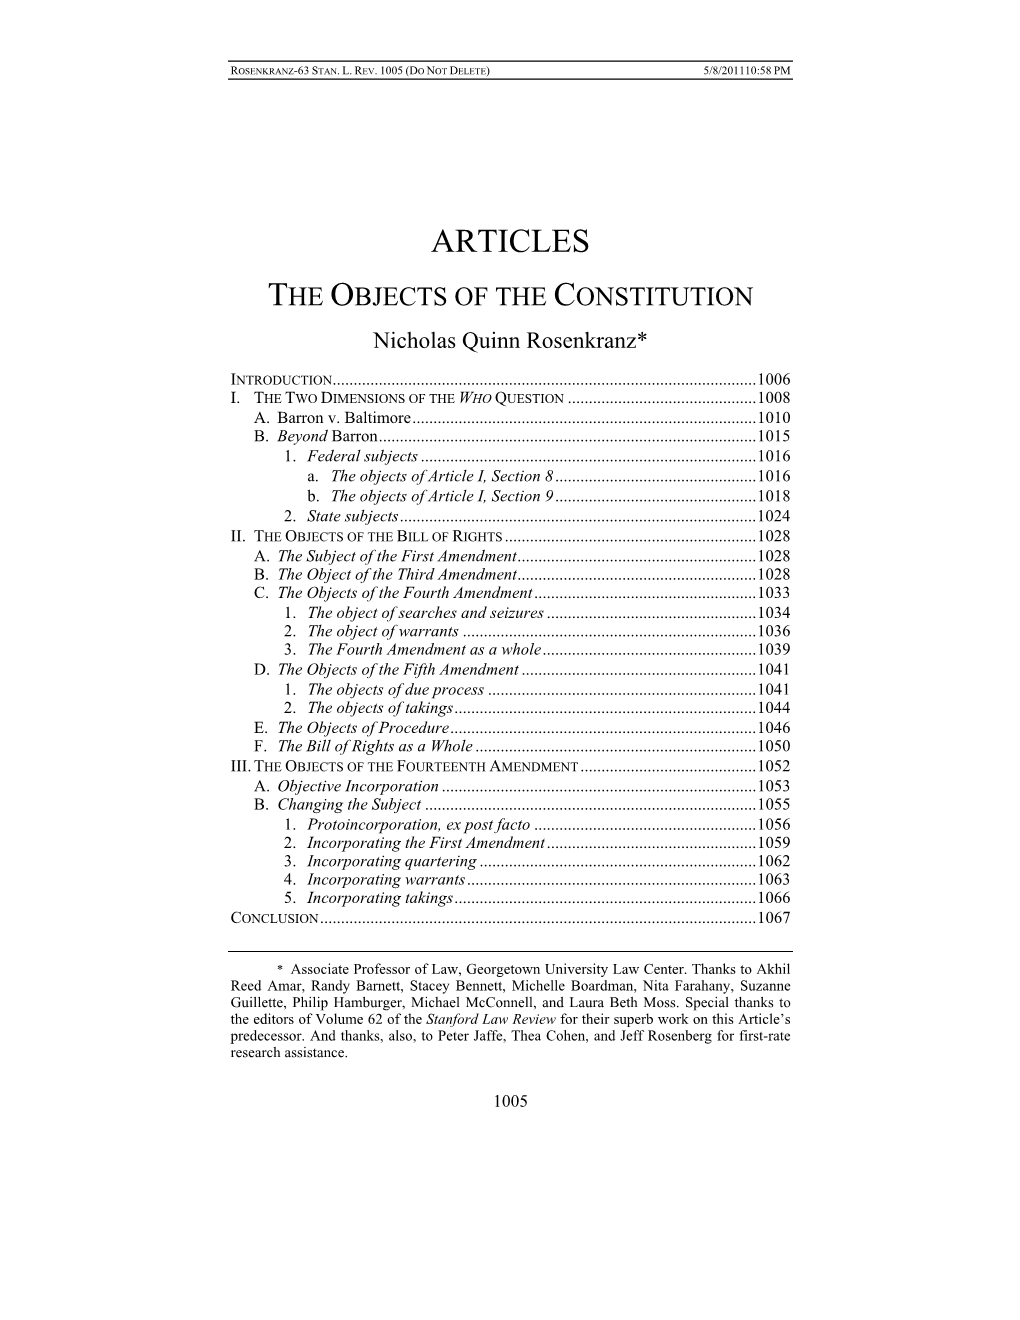 ARTICLES the OBJECTS of the CONSTITUTION Nicholas Quinn Rosenkranz*